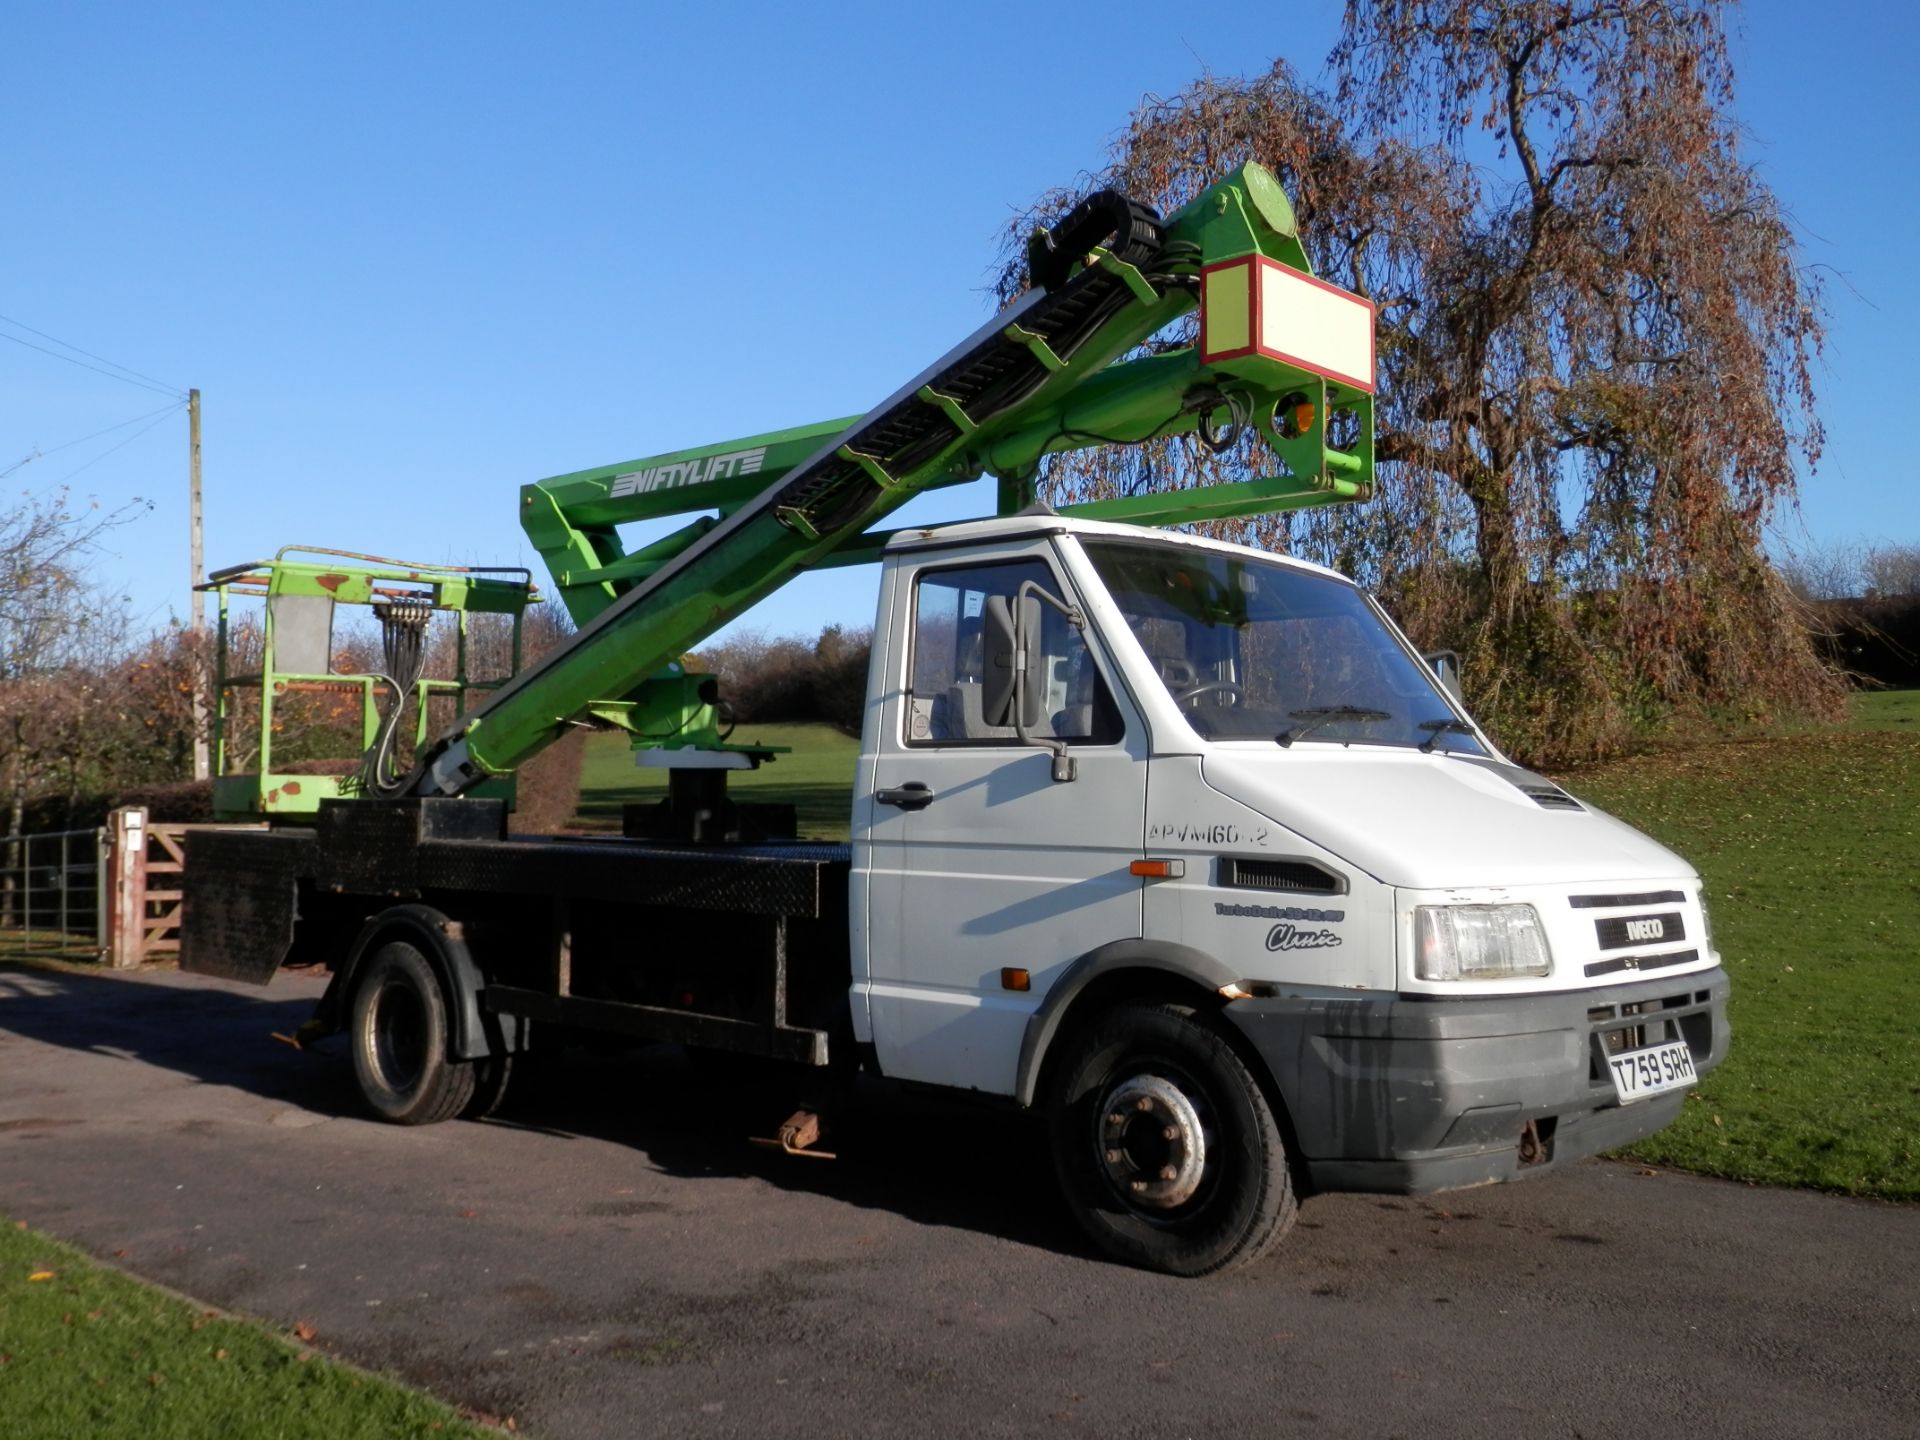 1999/T REG IVECO DIESEL TRUCK WITH NIFTY LIFT 16 METRE PLATFORM WITH CURRENT CERTIFICATION.